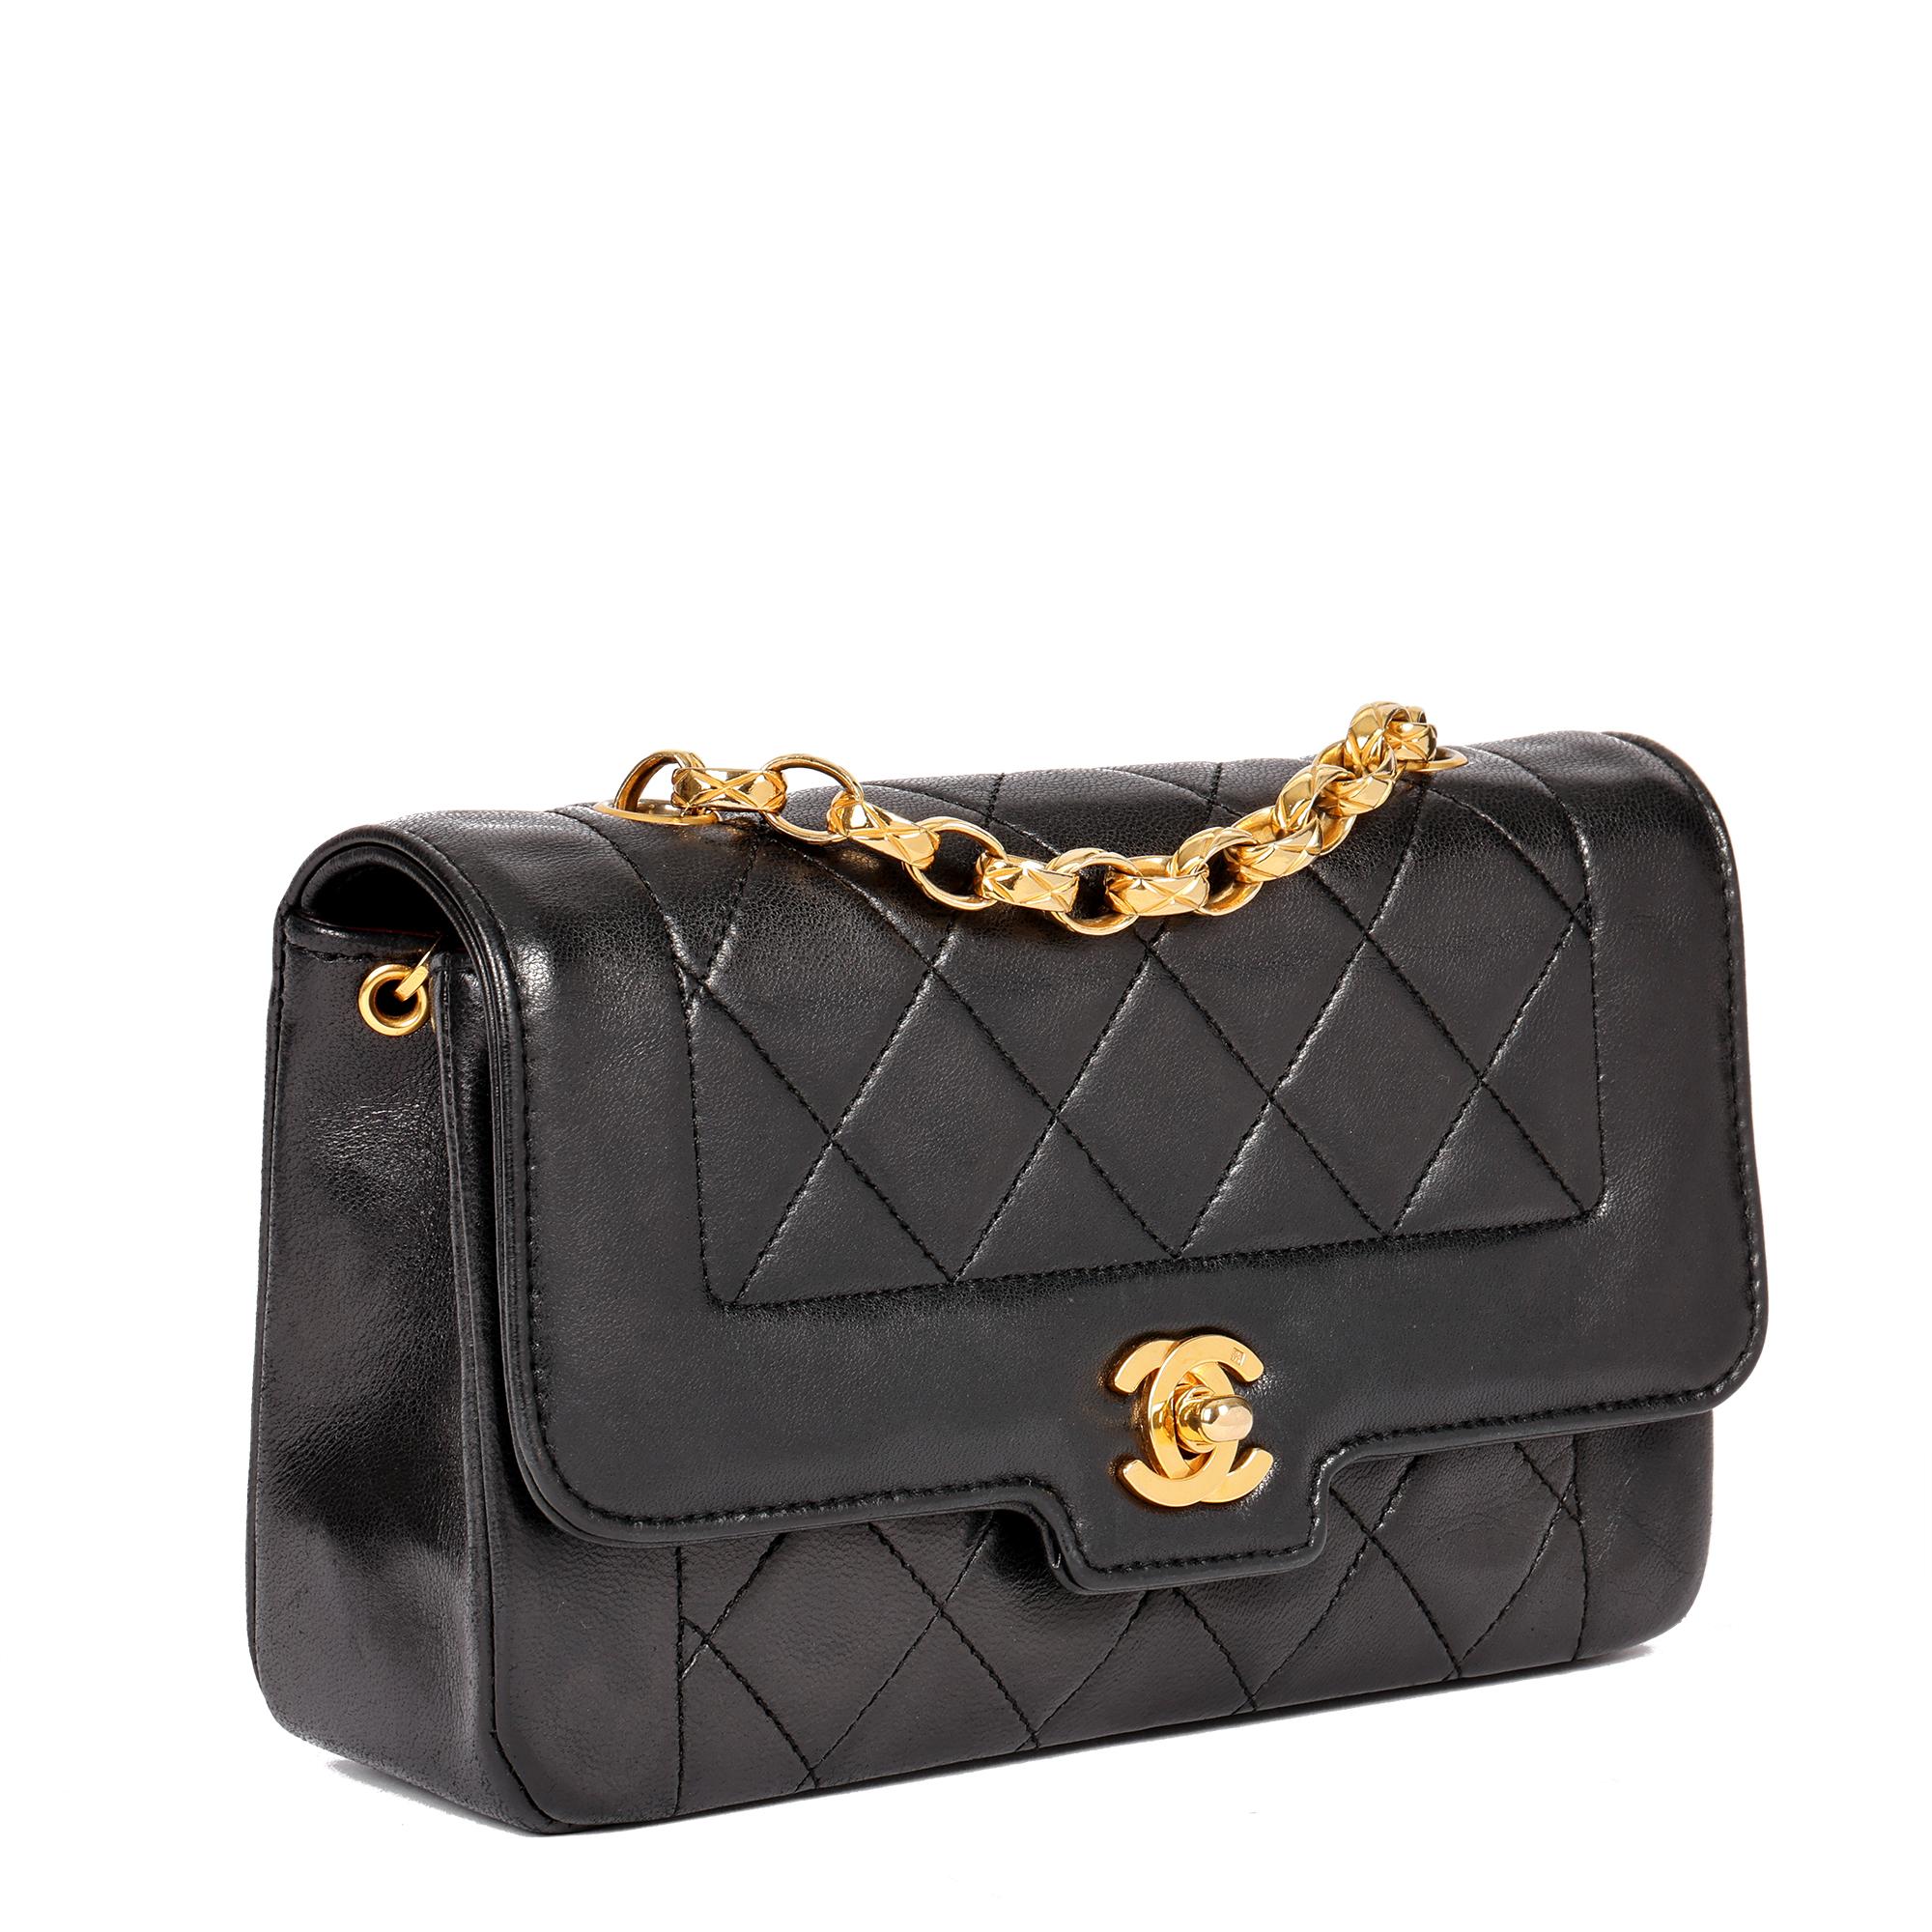 CHANEL
Black Quilted Lambskin Vintage Mini Diana Classic Single Flap Bag

Serial Number: 1873537
Age (Circa): 1990
Accompanied By: Chanel Dust Bag, Authenticity Card
Authenticity Details: Authenticity Card, Serial Sticker (Made in France)
Gender: